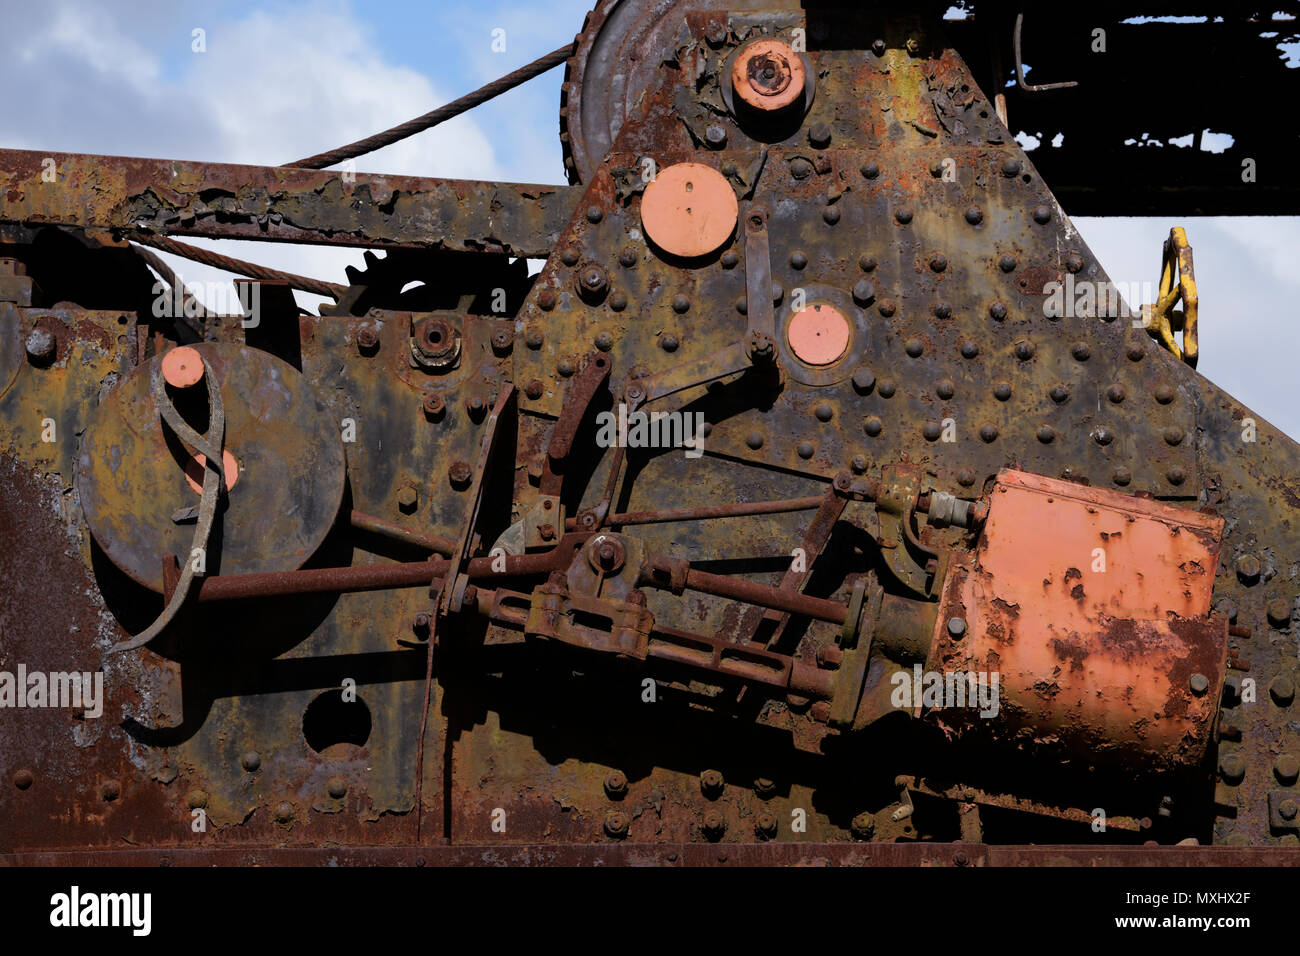 Rust covered linkages, pushrods and mechanical devices on vintage railroad maintenance equipment Stock Photo